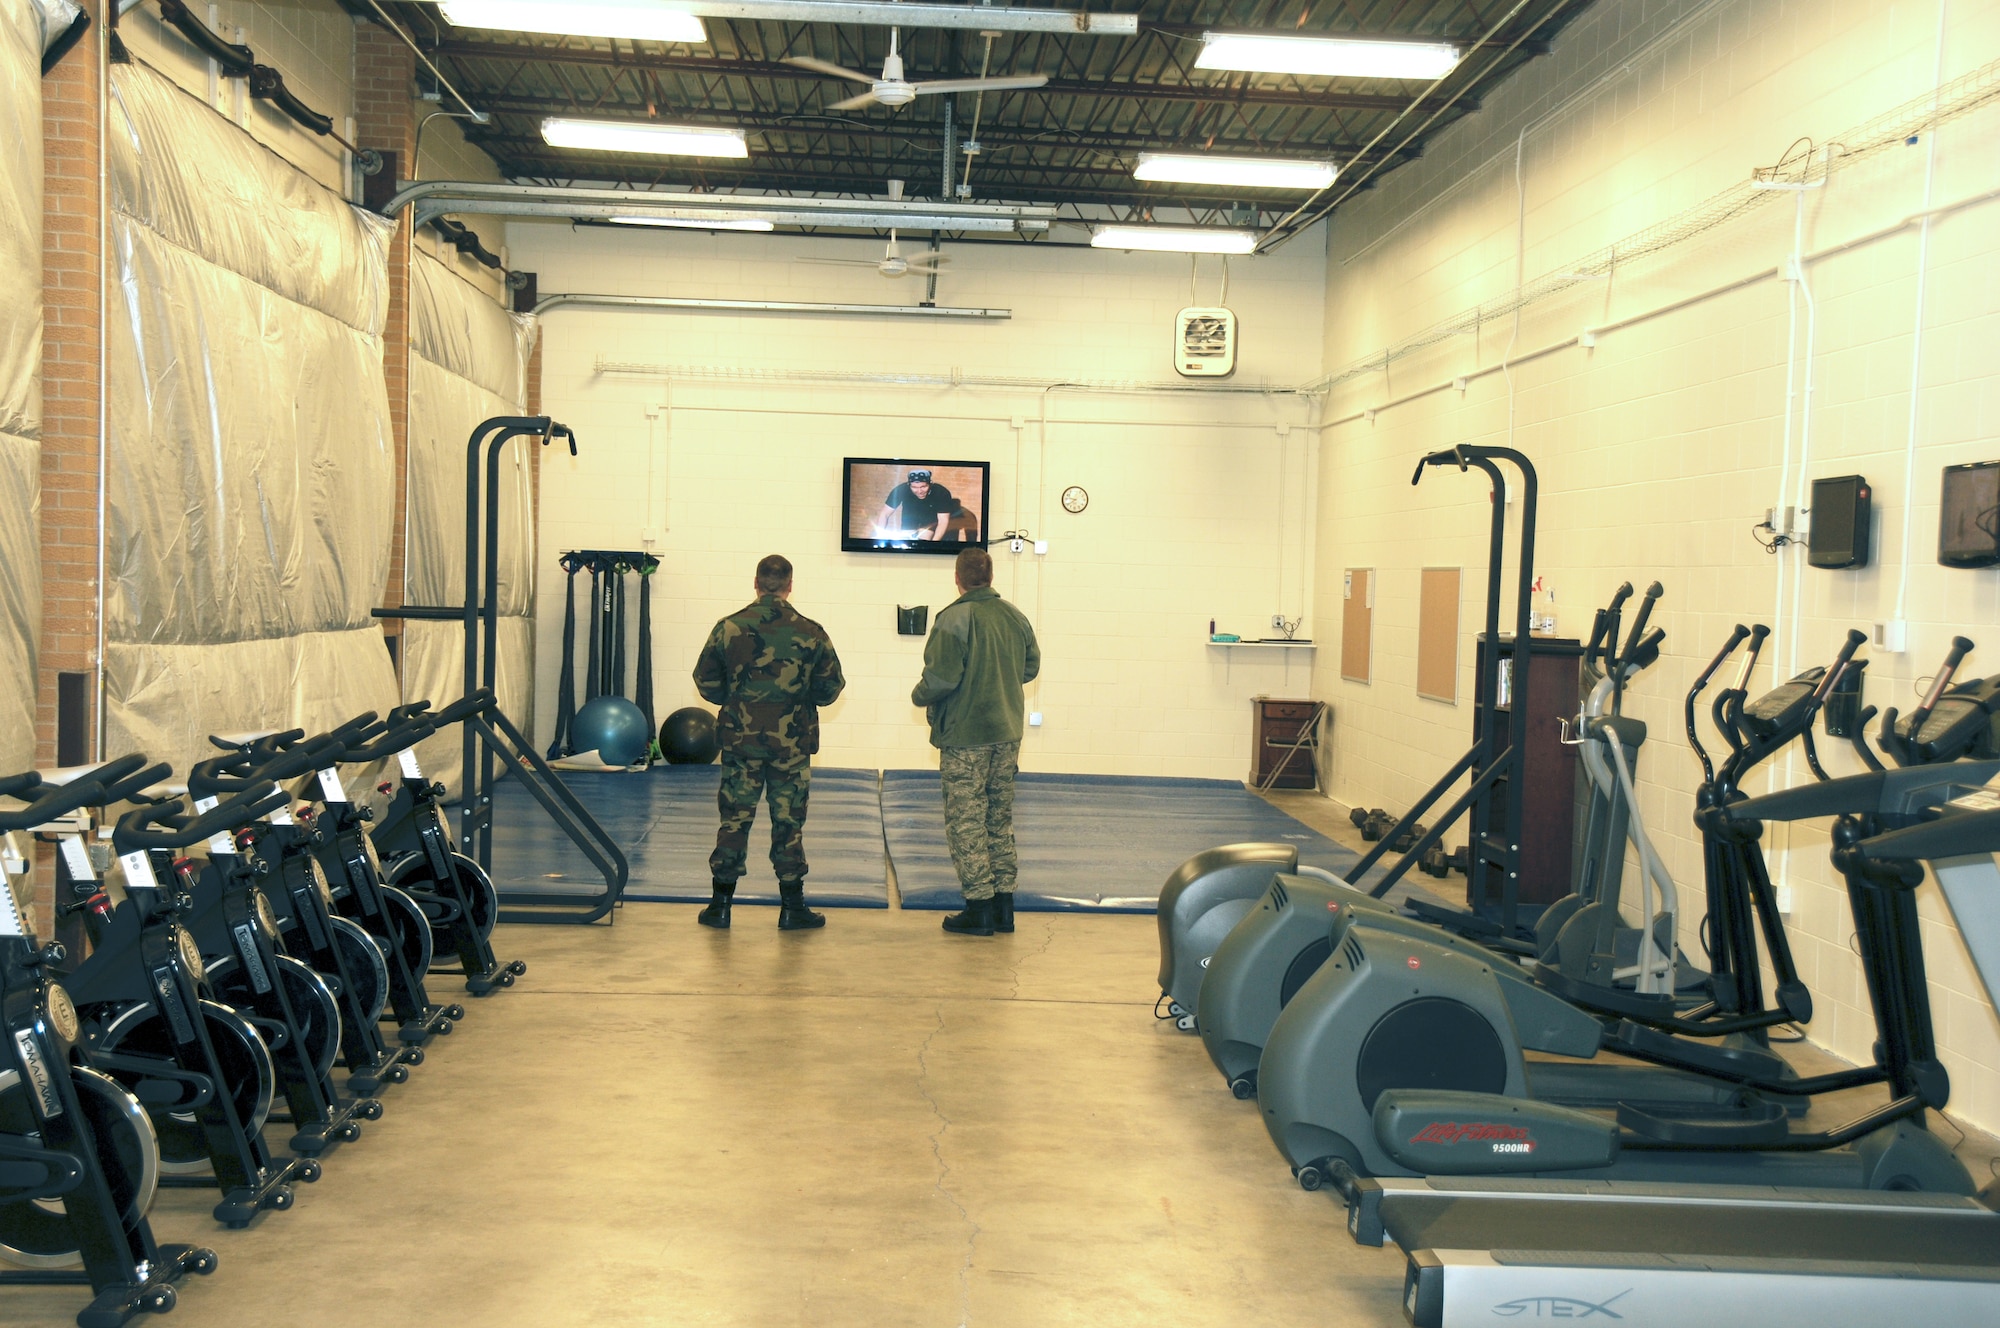 The 185th Air Refueling Wing, Iowa Air National Guard, Sioux City, Iowa, hosted their open house on the newly updated base gym on March 6, 2010. The 185th spent approximately fifty thousand dollars on equipment and renovations.
Air Force Photo by: Tech. Sgt. Oscar M. Sanchez